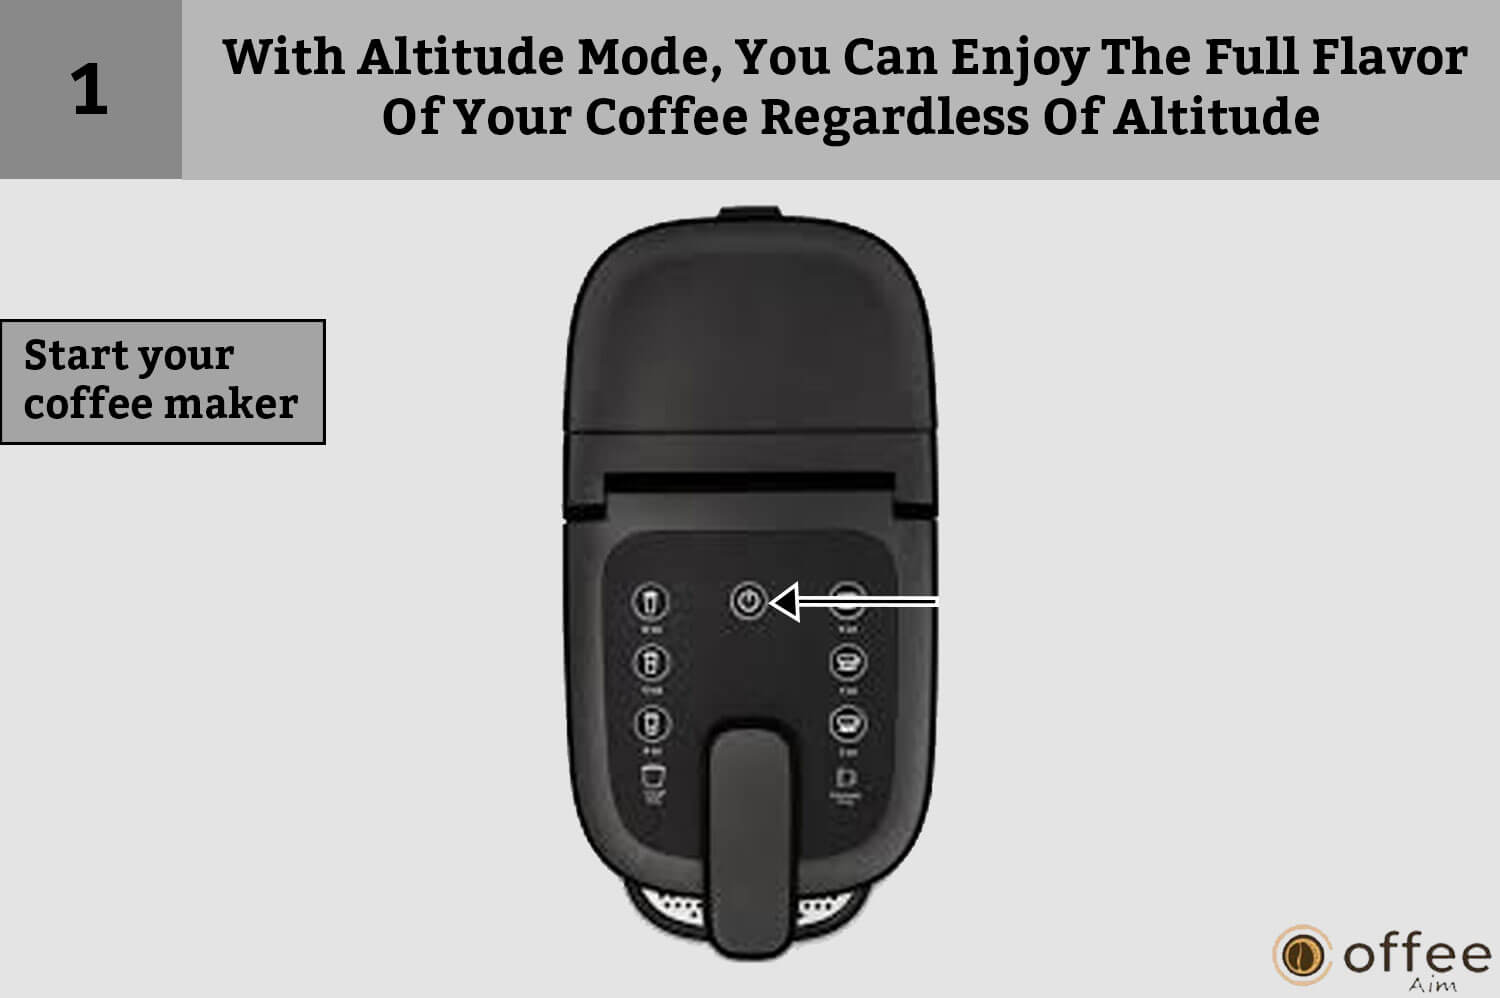 This image provides instructions on how to "Start your coffee maker" with Altitude Mode, ensuring you can savor the full coffee flavor at any altitude. This is part of our guide on "How to Connect Nespresso Vertuo Creatista machine."